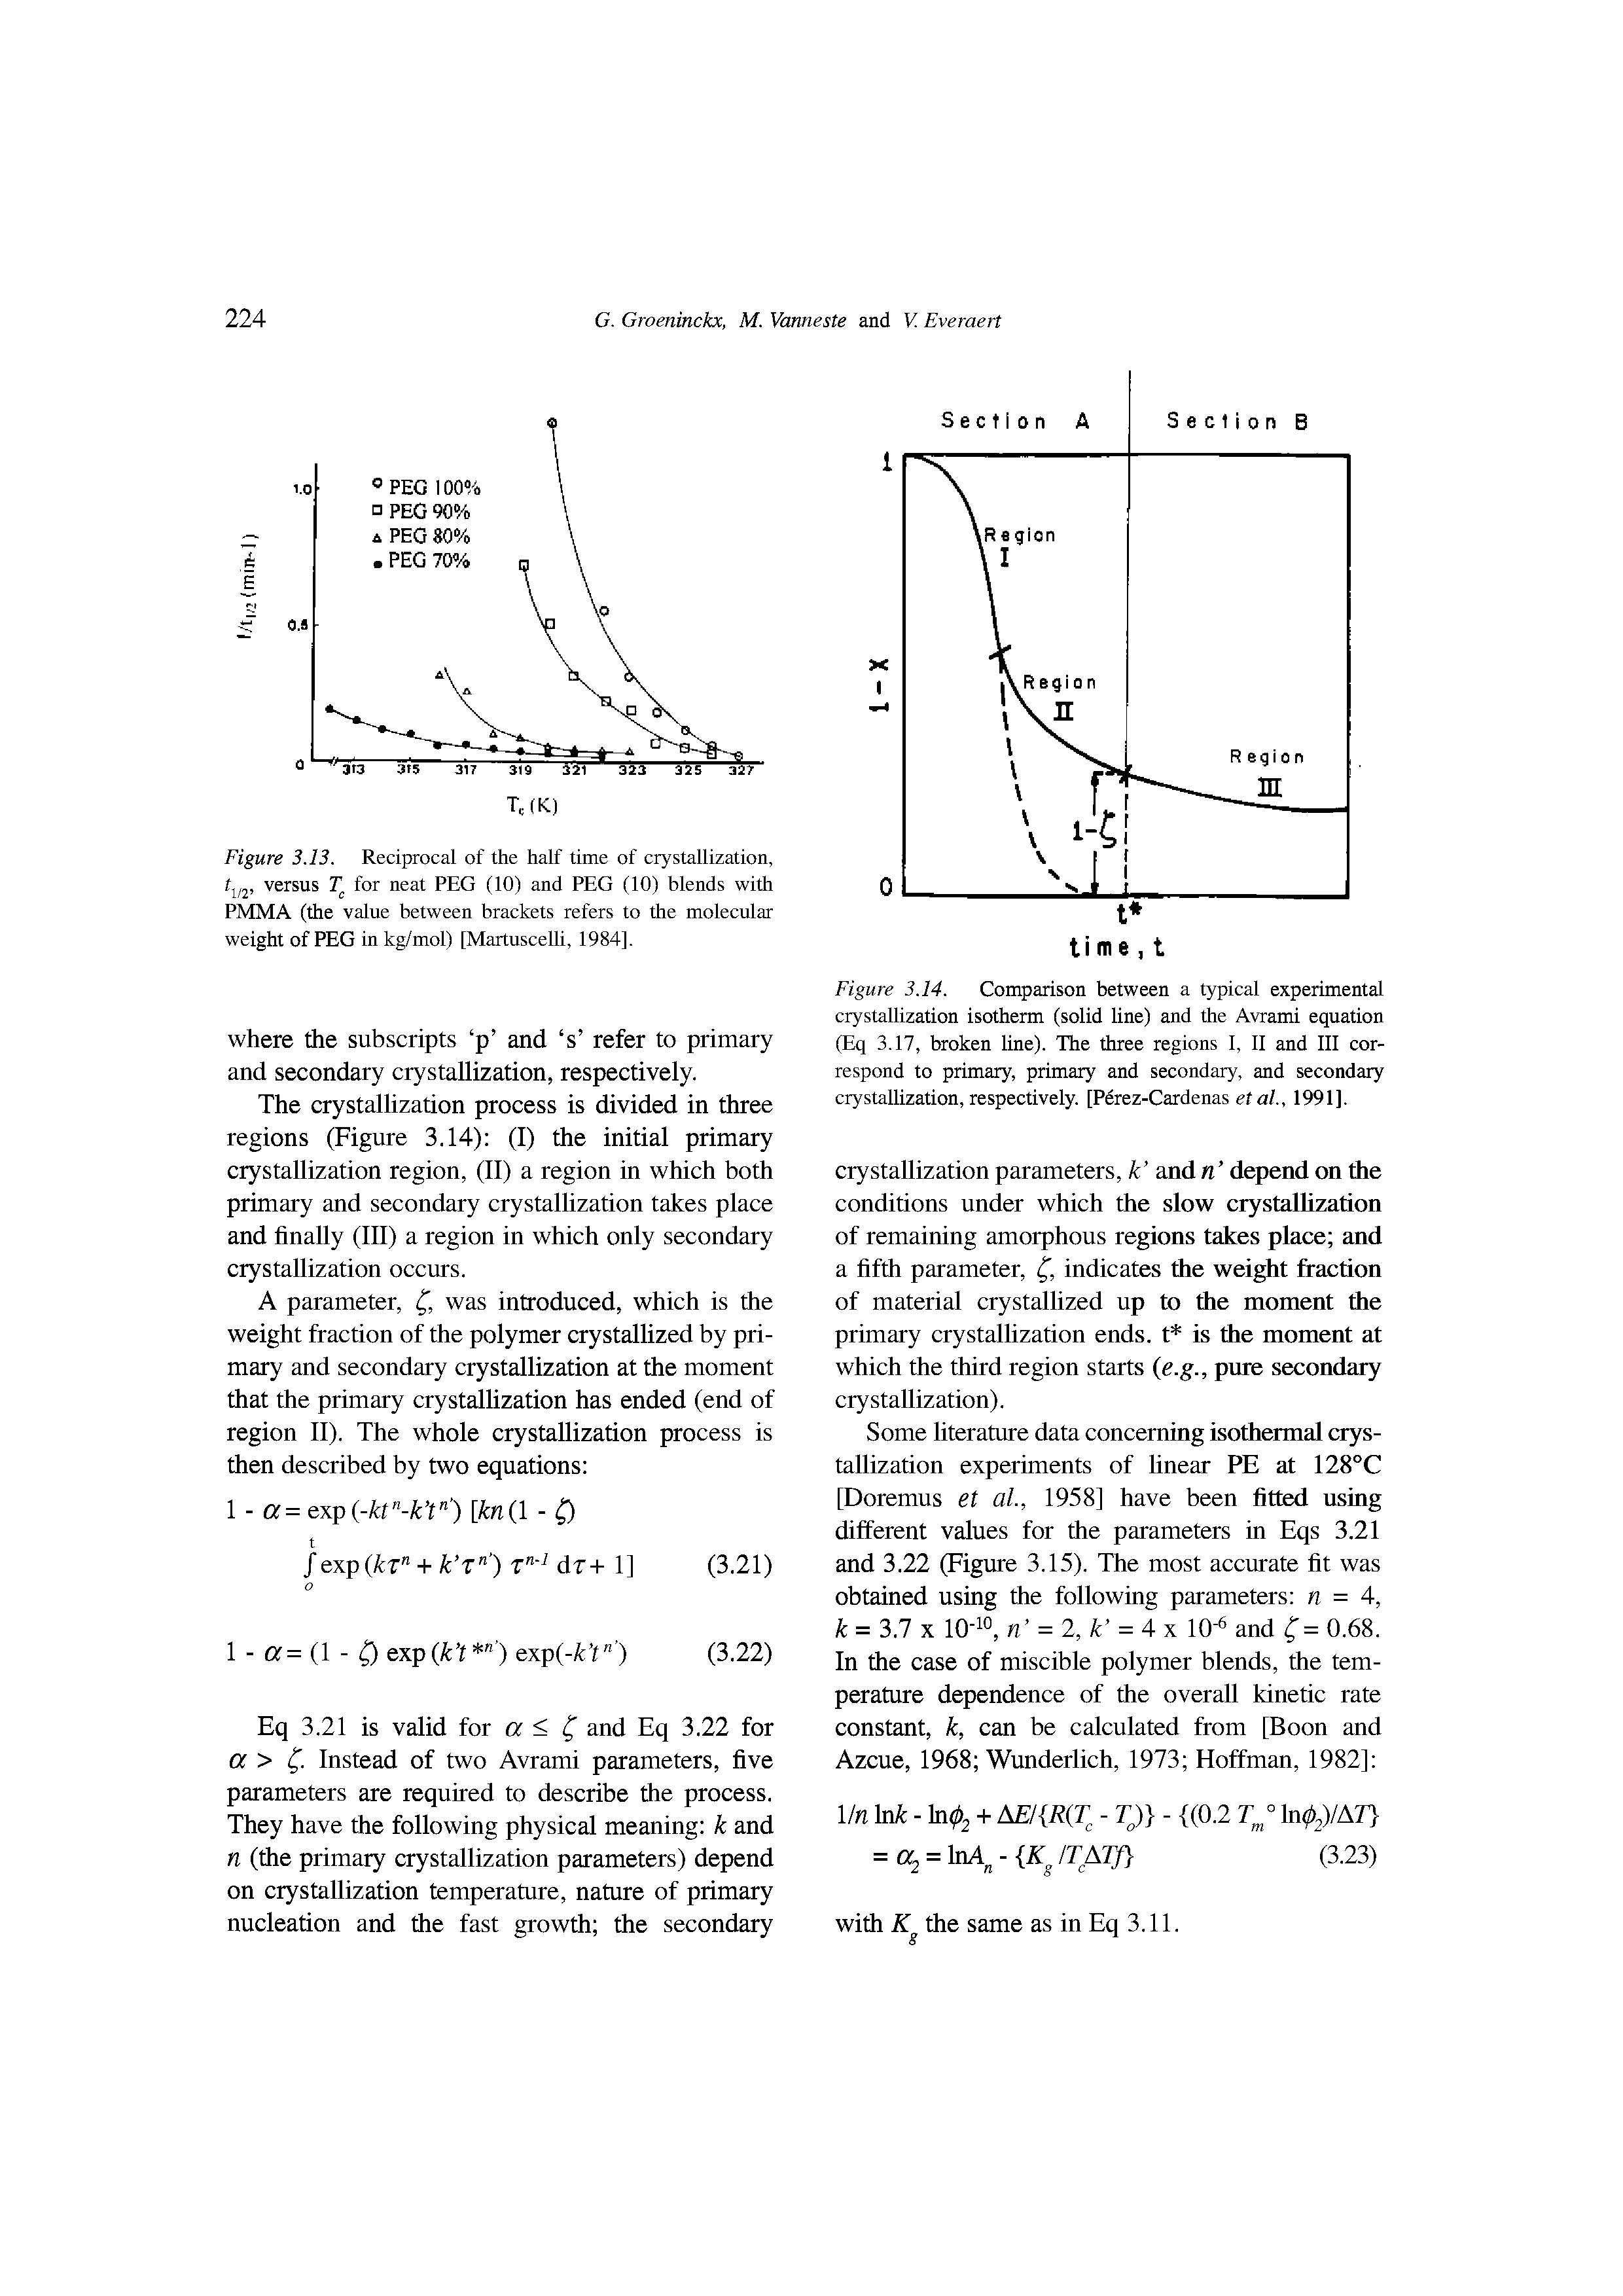 Figure 3.14. Comparison between a typical experimental crystallization isotherm (solid line) and the Avrami equation (Eq 3.17, broken line). The three regions 1, II and III correspond to primary, primary and secondary, and secondary crystallization, respectively. [Perez-Cardenas et al., 1991].